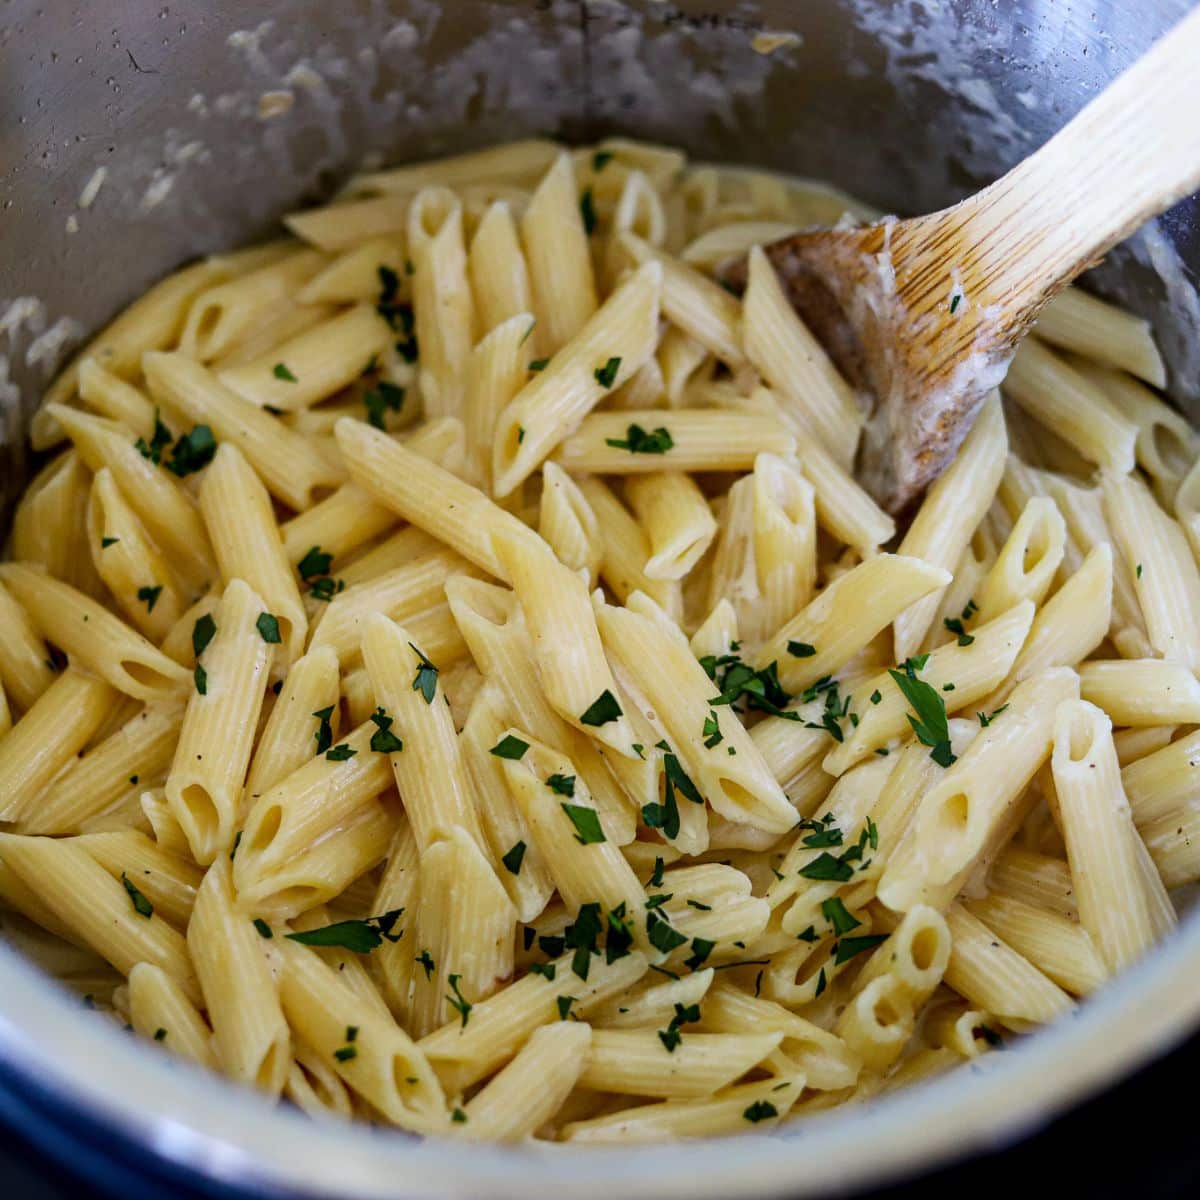 Homemade pasta and Alfredo in an instant pot, garnished with chopped parsley